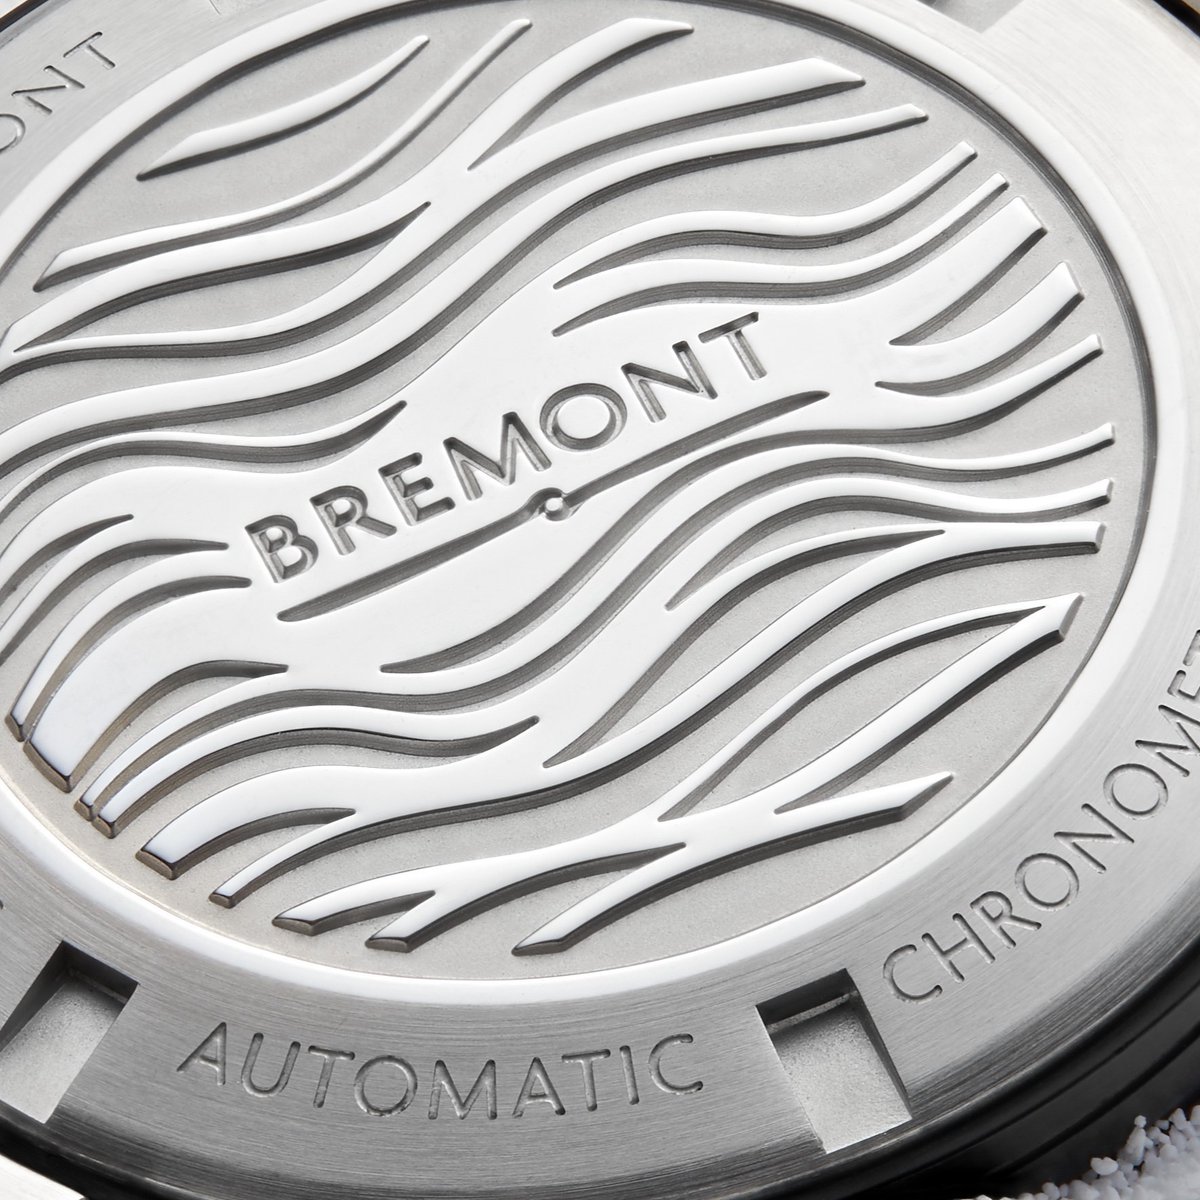 The Bremont 3000 Miles Watch 🌊 This timepiece is available exclusively to all Atlantic Race Challenge winners, competitors and has been extensively tested out in the field to withstand extreme conditions. To enquire, please contact military@bremont.com #Bremont #3000Miles